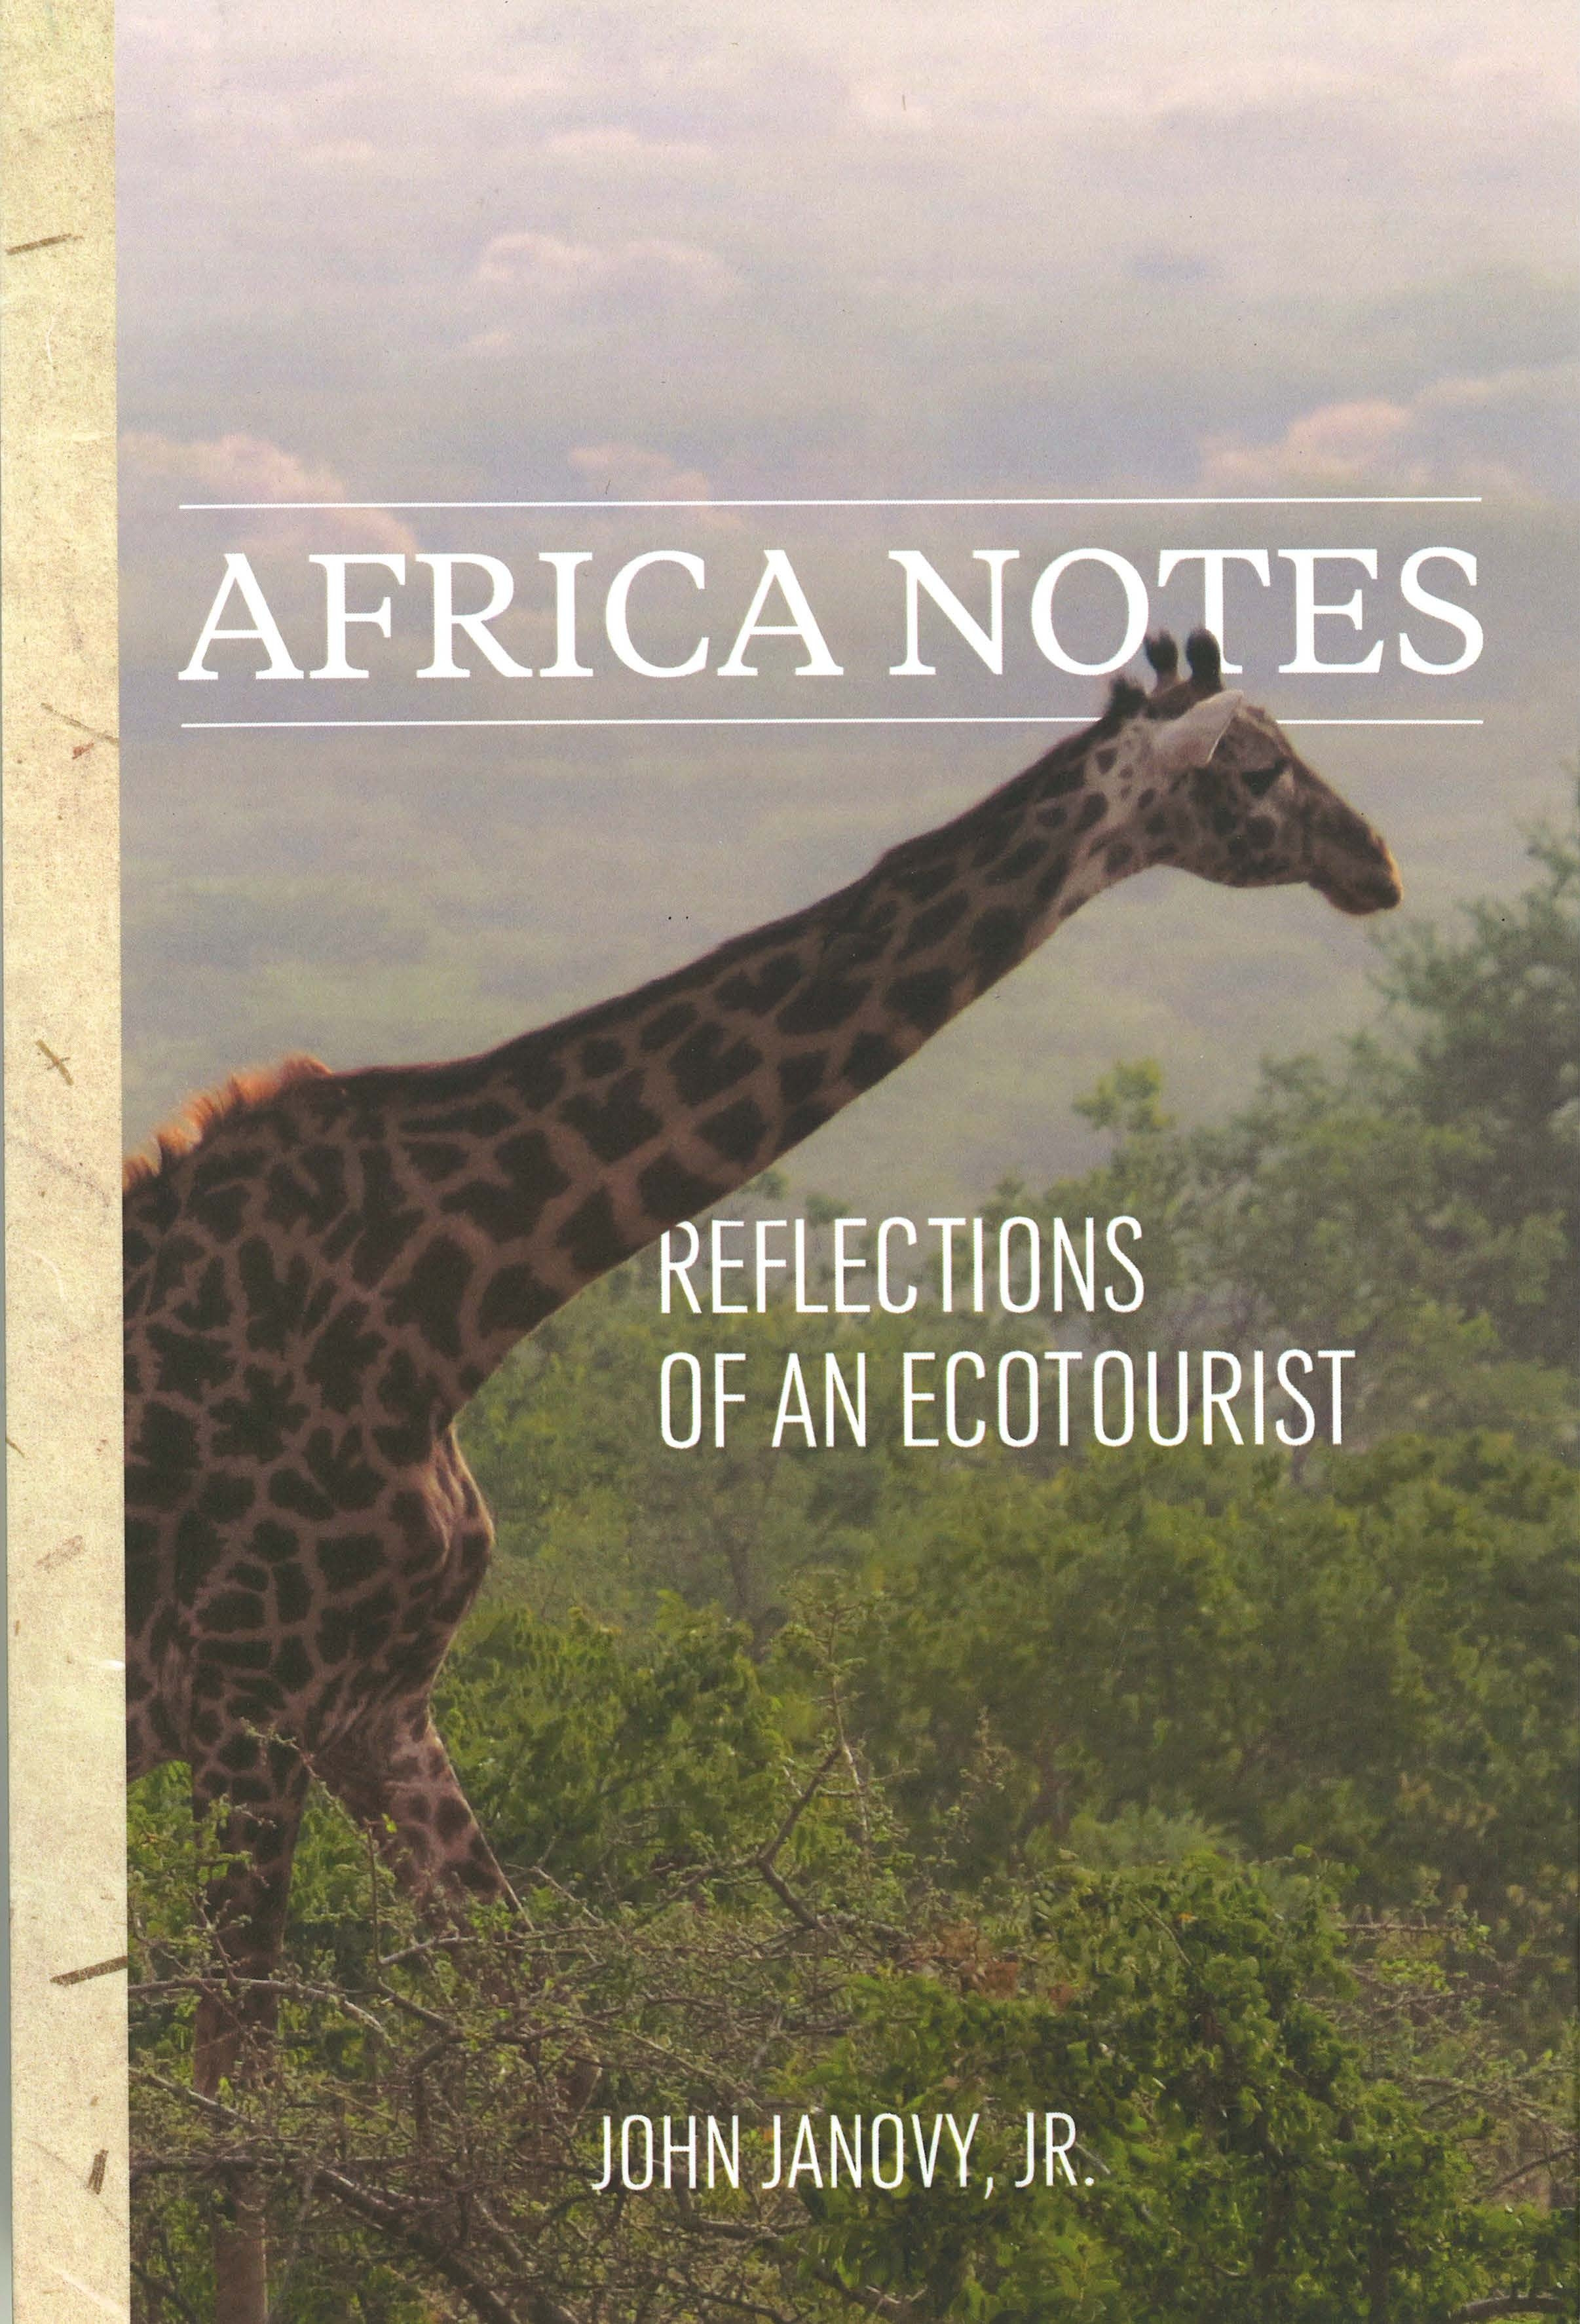 Africa Notes: Reflections of an Ecotourist (MP-129)